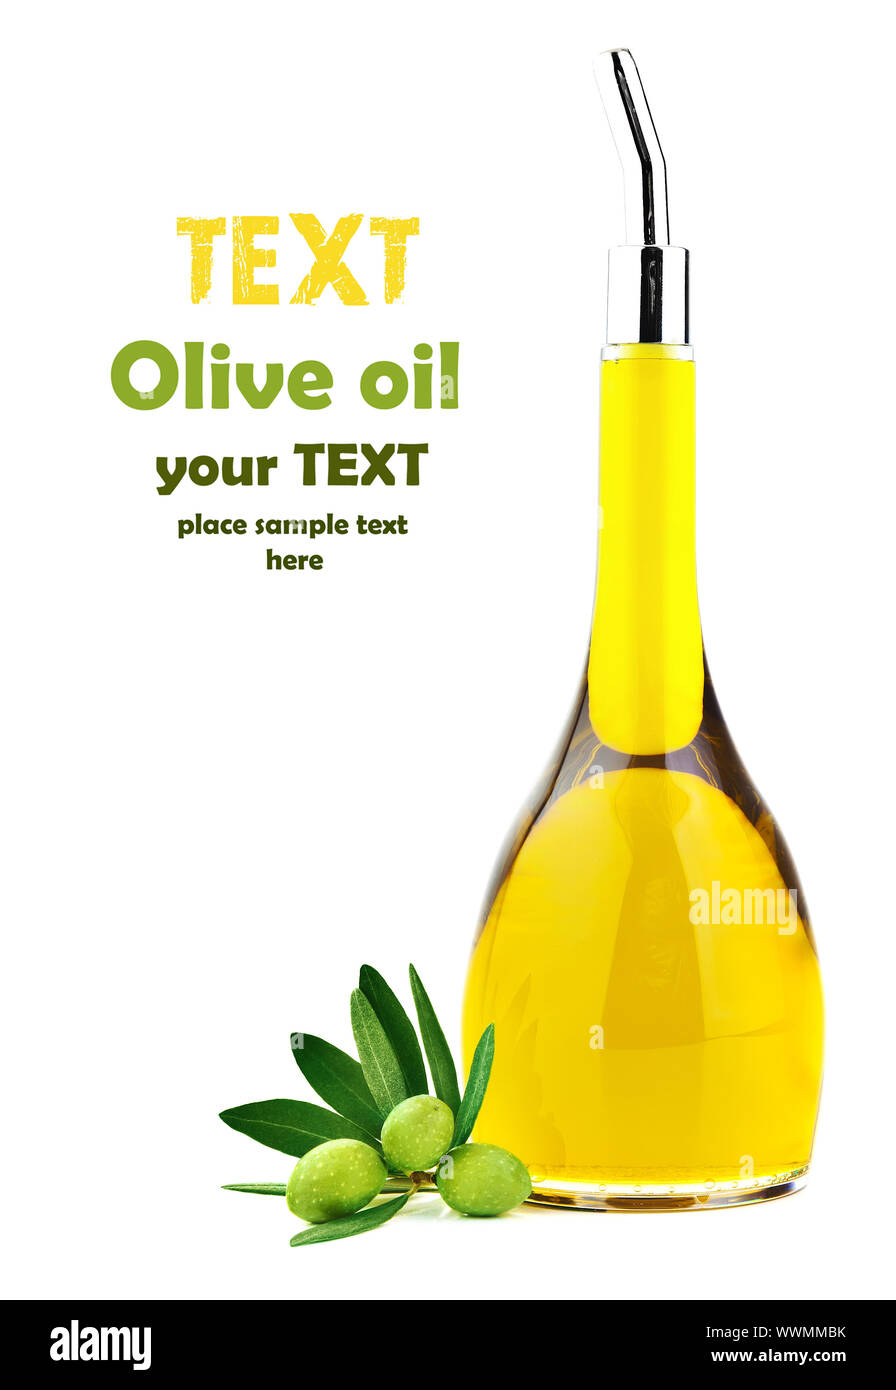 Homemade healthy olive oil, fresh green olives and bottle of oil isolated on white background, harvest and organic food concept Stock Photo